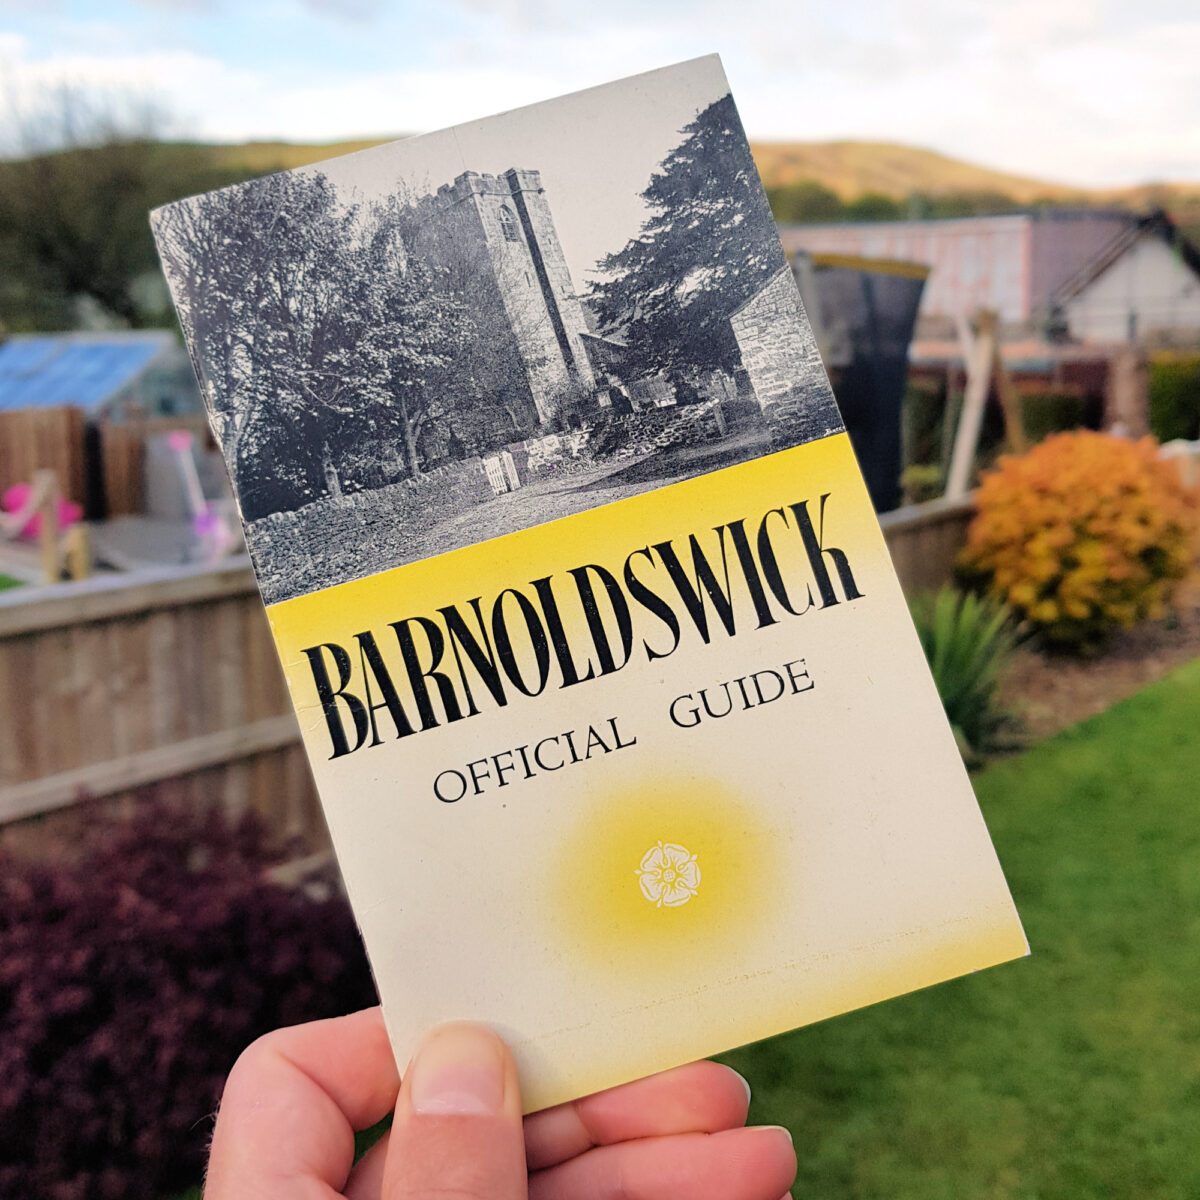 barnoldswick yorkshire official guide c1950s photo